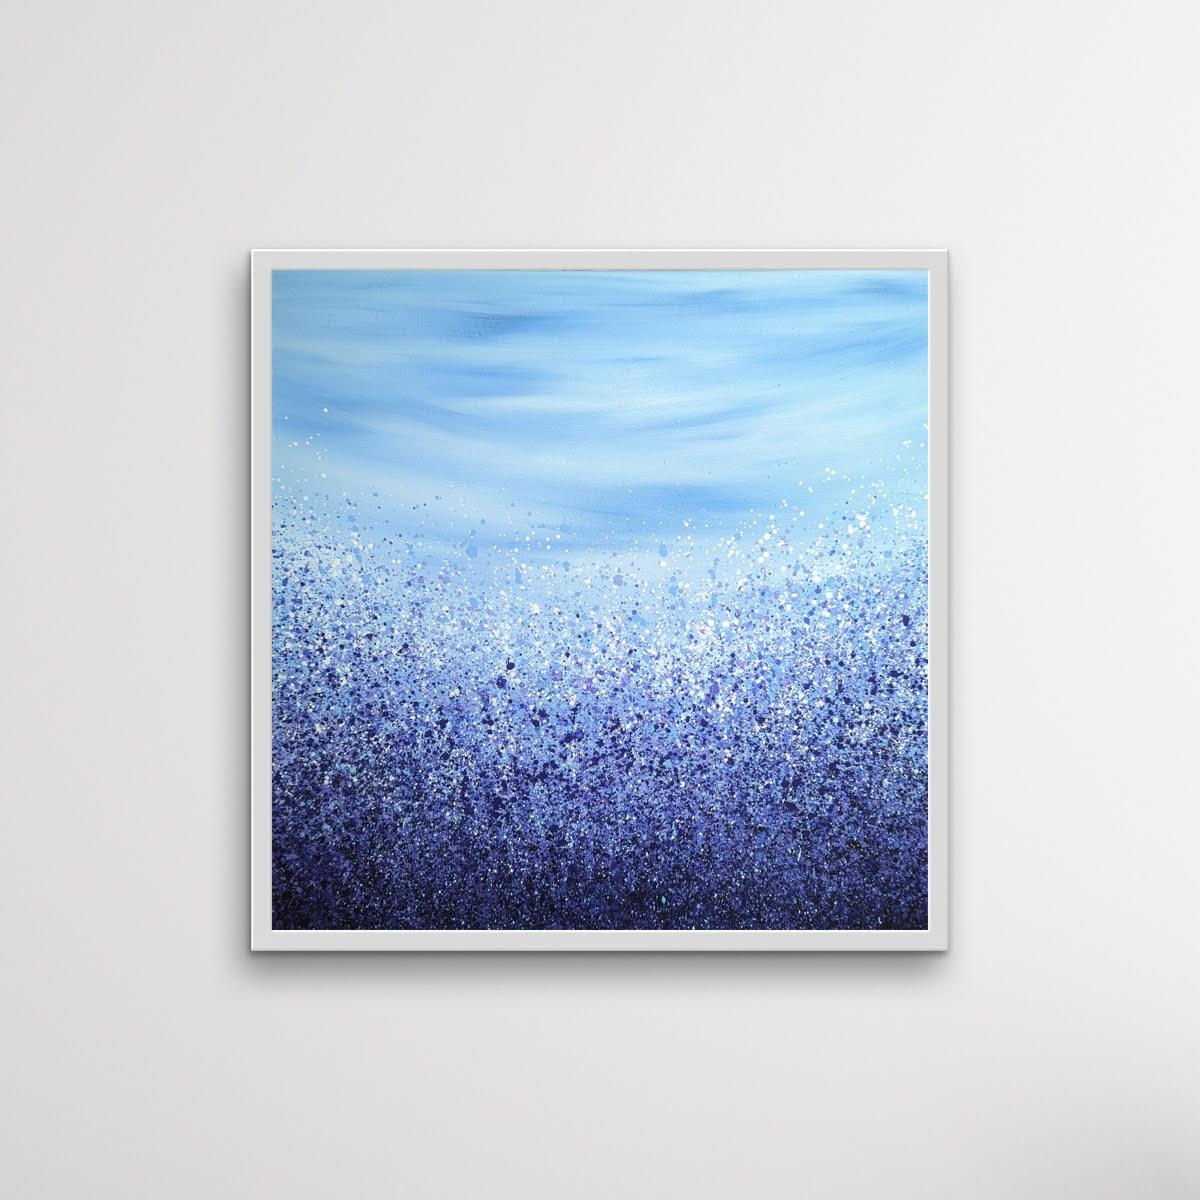 Wild Amethyst Radiance – By Lucy Moore [2022]
original and hand signed by the artist 
Acrylic on canvas
Image size: H:60 cm x W:60 cm
Complete Size of Unframed Work: H:60 cm x W:60 cm x D:1.5cm
Sold Unframed
Please note that insitu images are purely